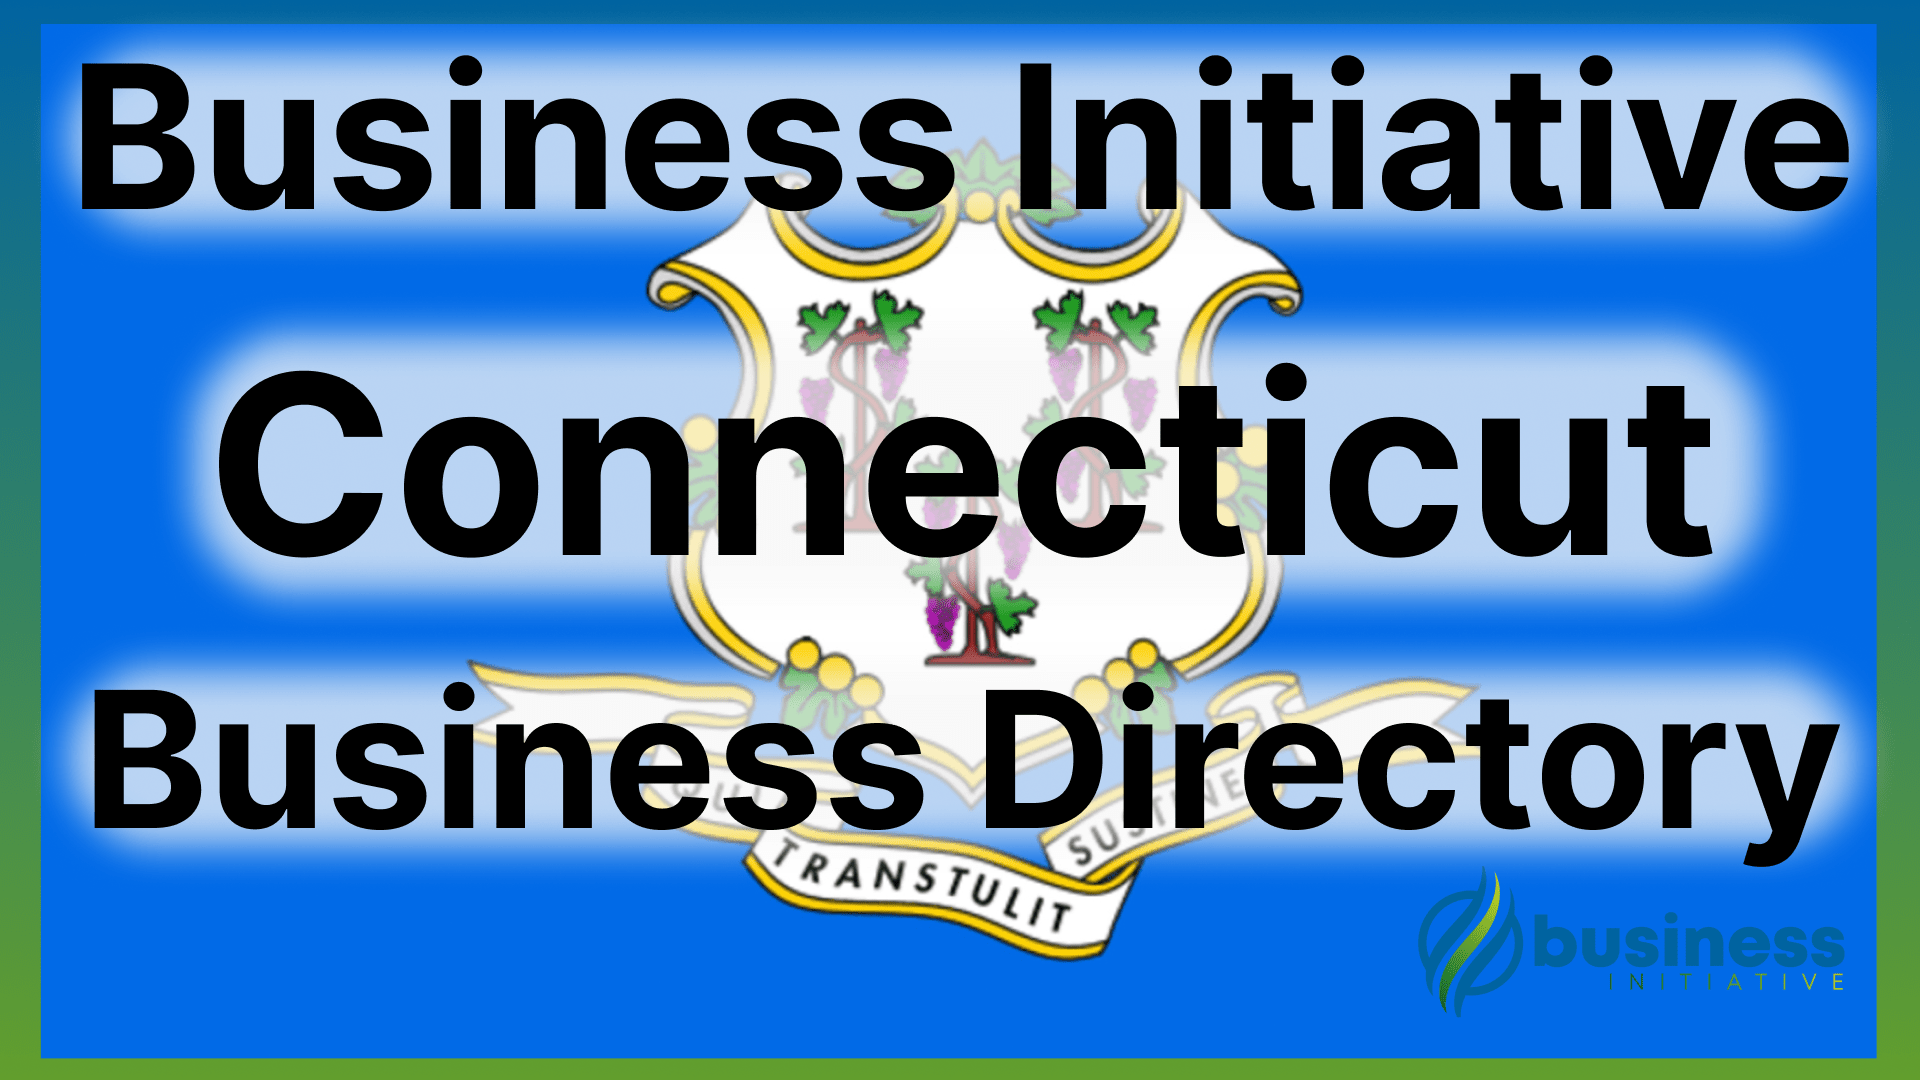 connecticut state business directory